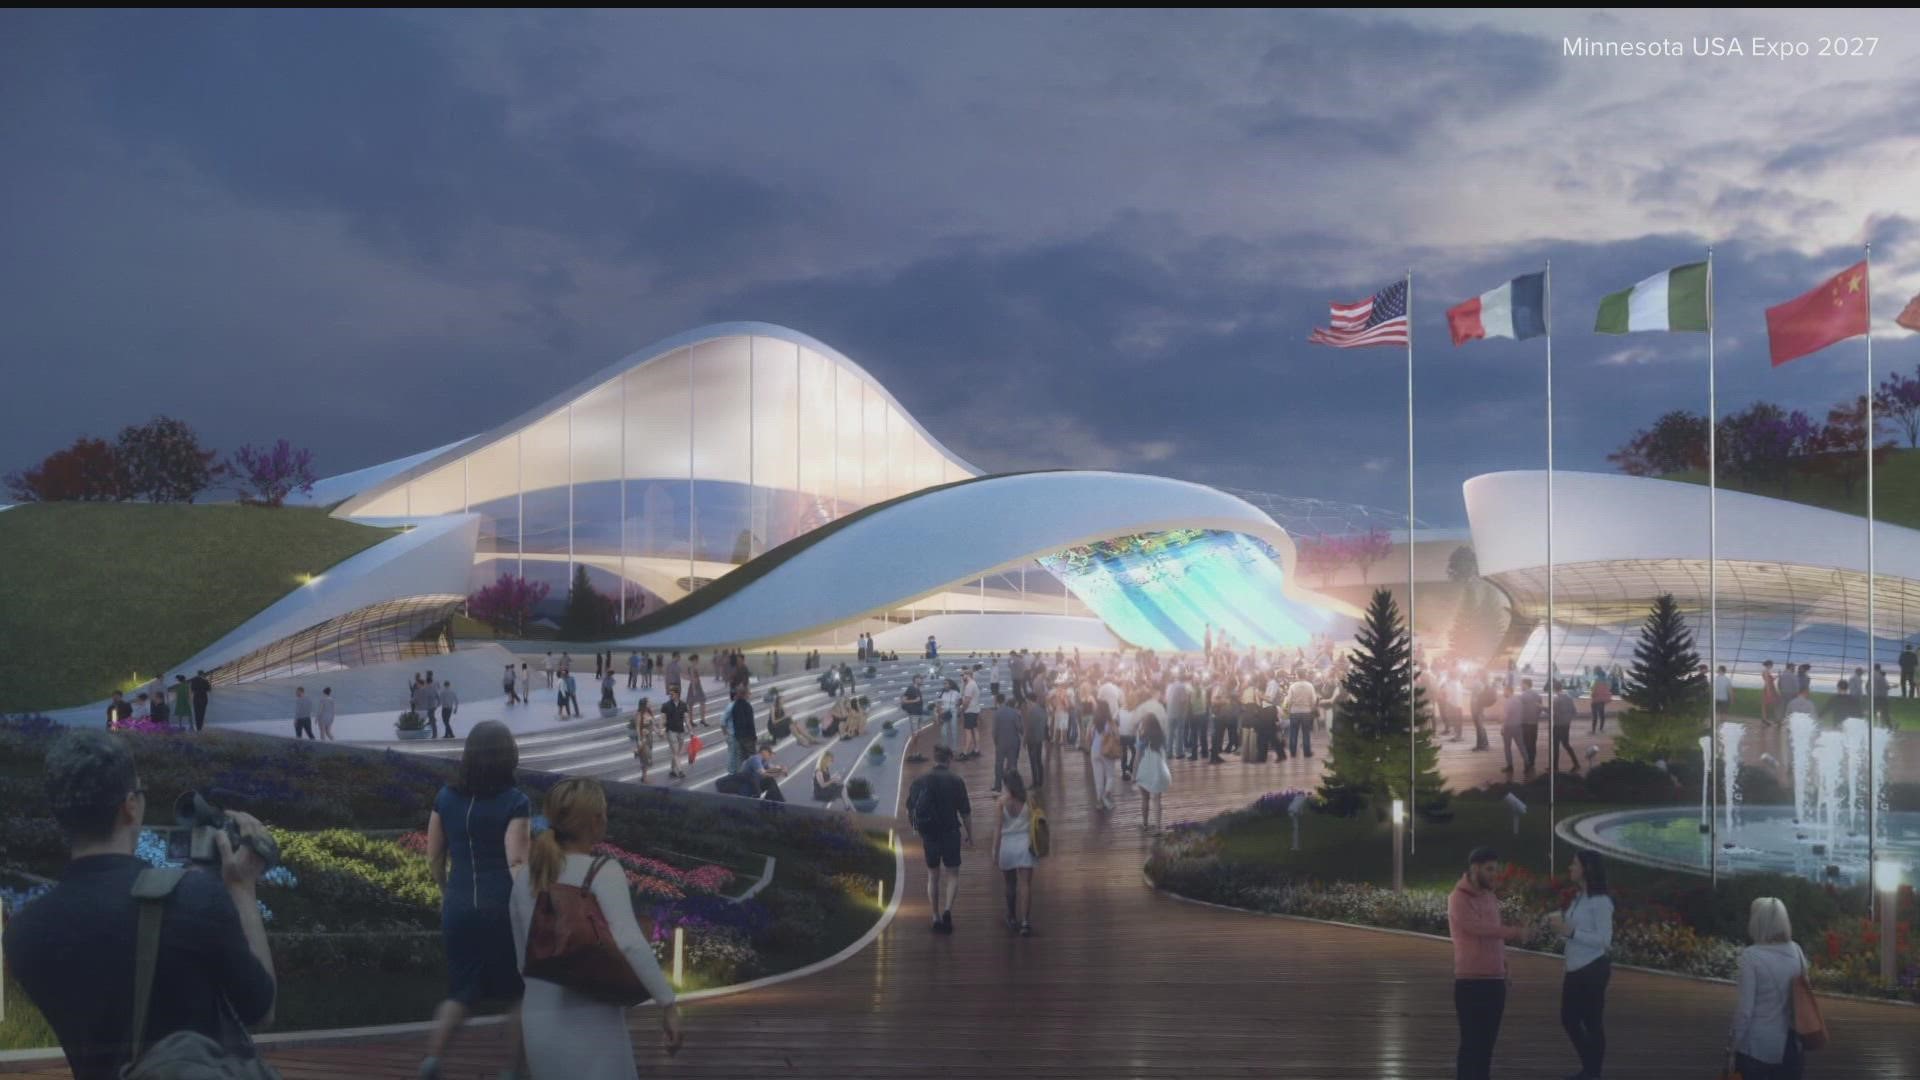 On Wednesday morning, Gov. Tim Walz and other state leaders gave an update on the push to bring the World's Expo to Bloomington.